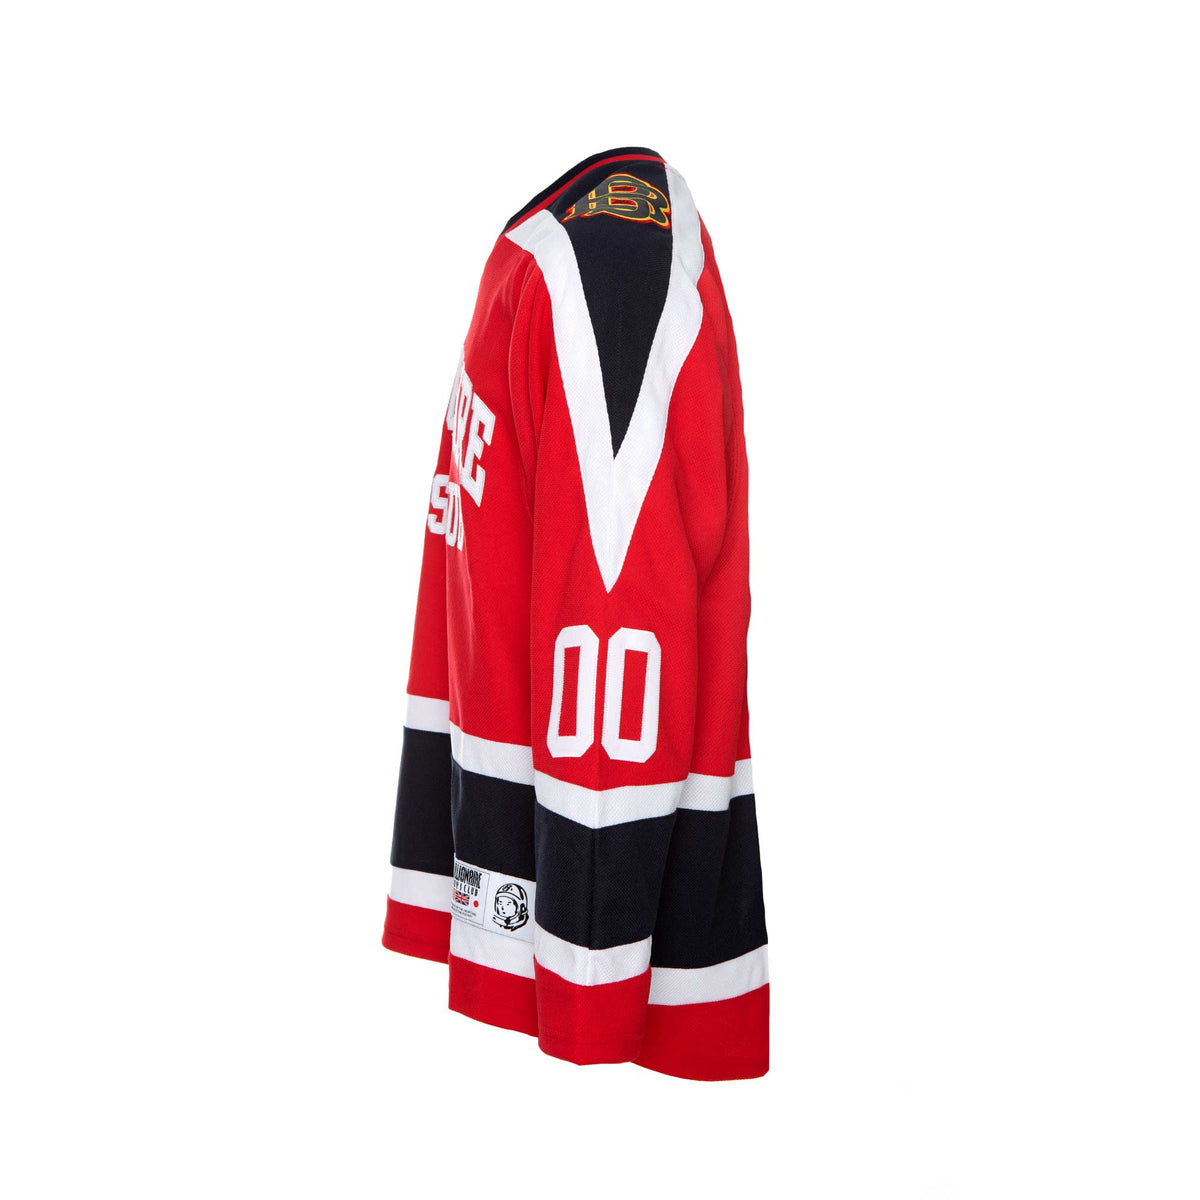 Billionaire Boys Club Don't Give a Puck Men's LS Knit Red